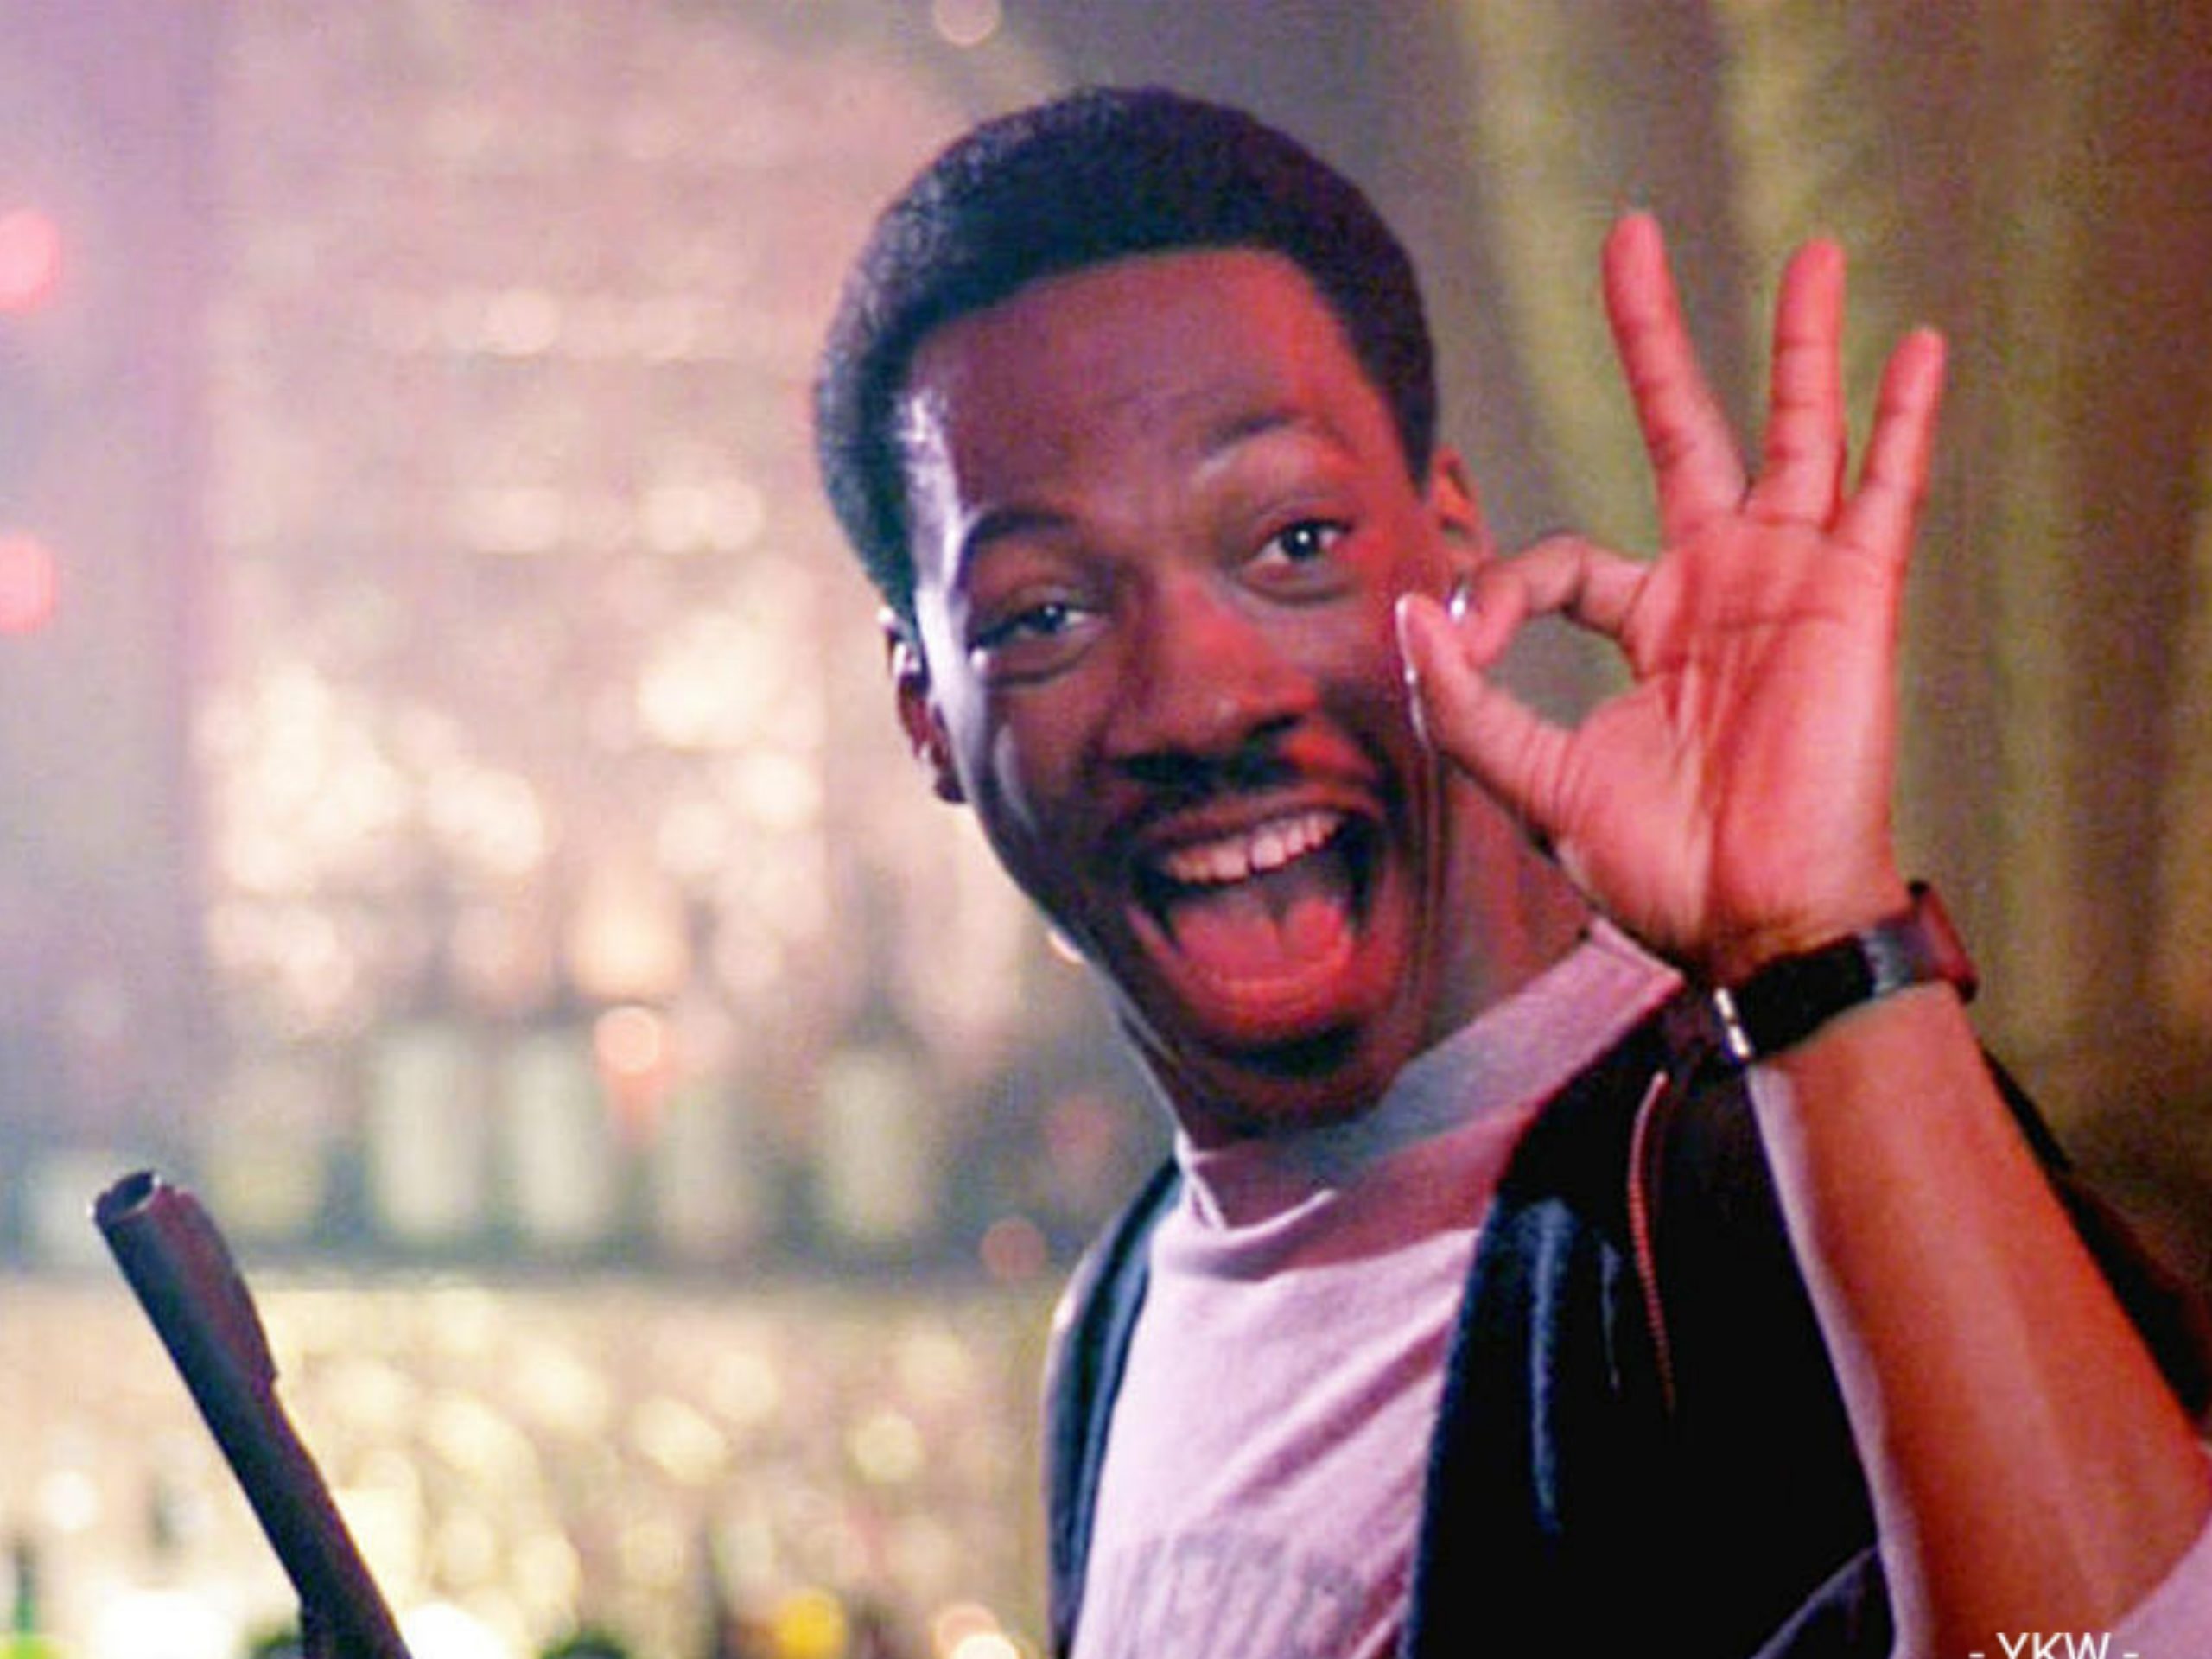 “Beverly Hills Cop 4” Set To Film With Netflix Soon